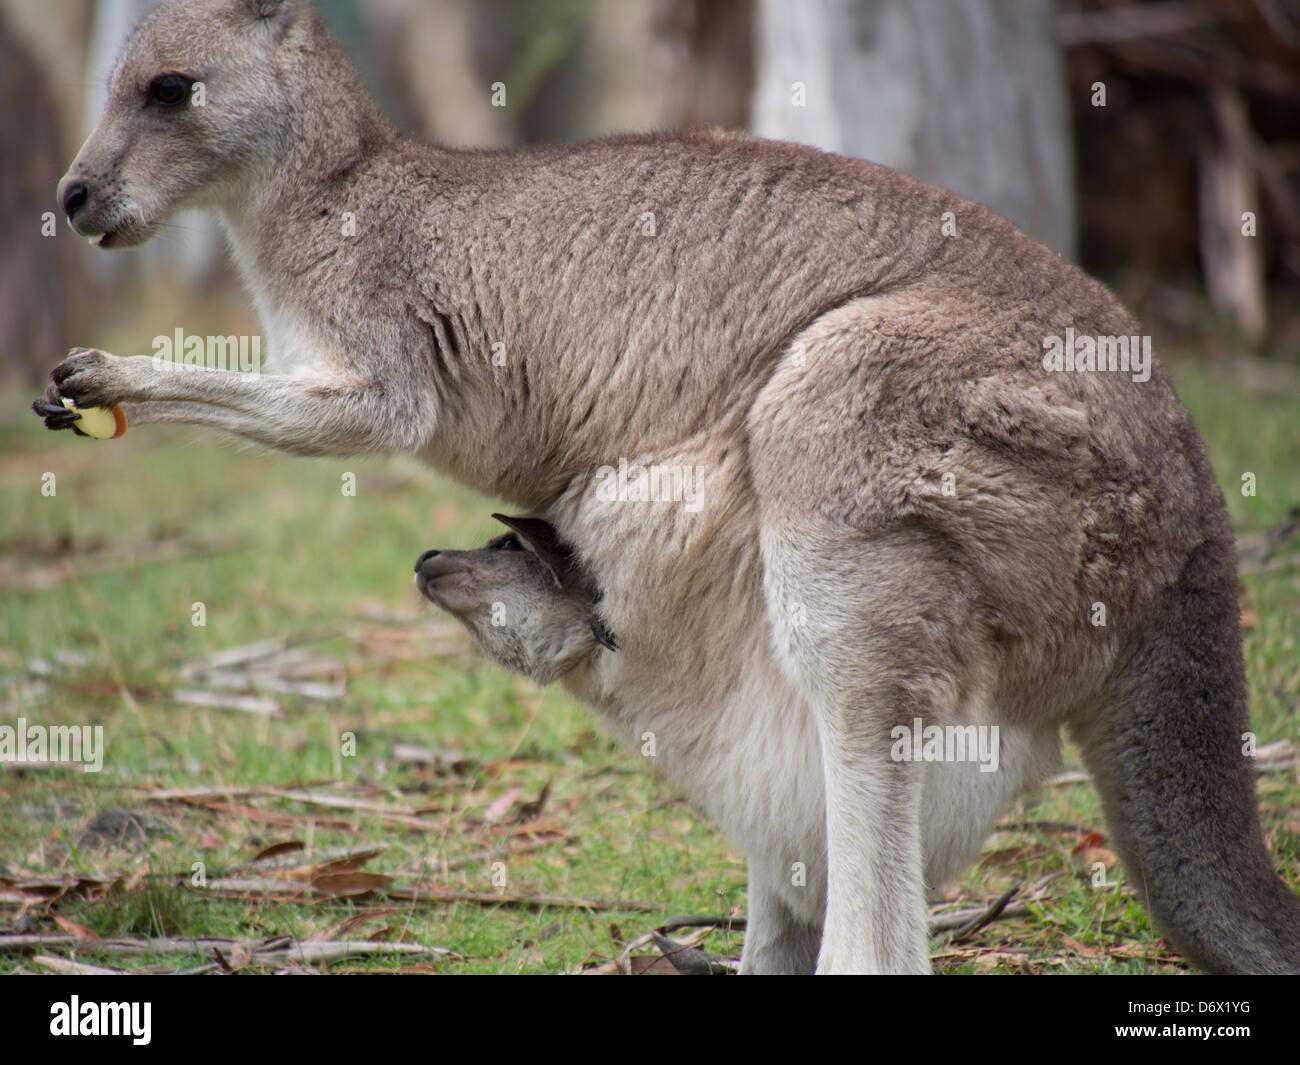 Baby kangaroo joey peeking out of its pouch asking for food Stock Photo